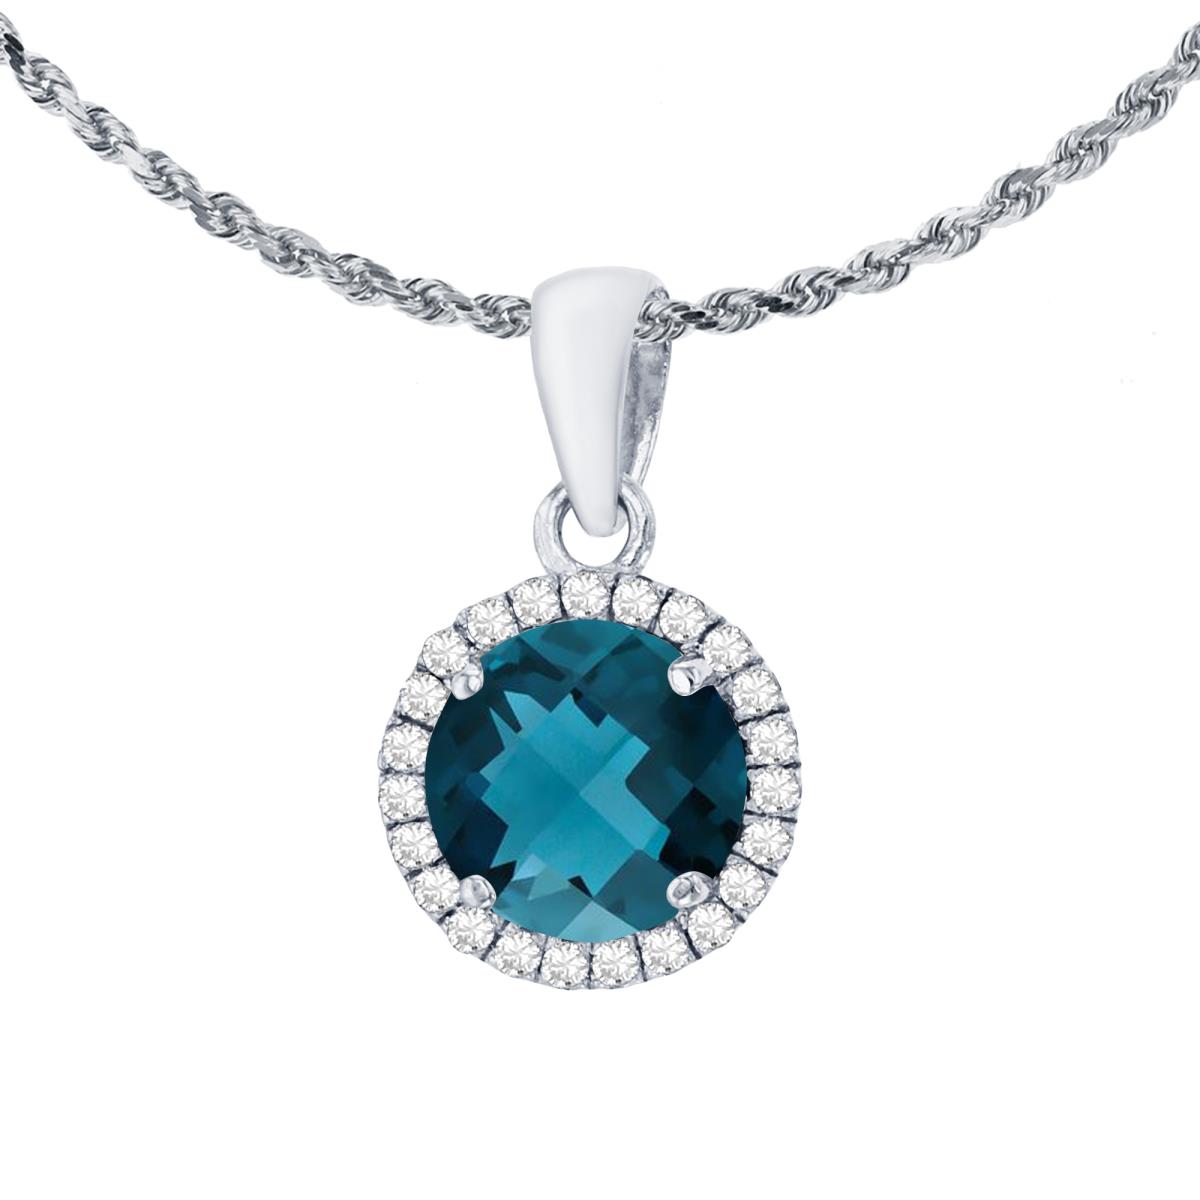 14K White Gold 7mm Round London Blue Topaz & 0.12 CTTW Diamond Halo 18" Rope Chain Necklace